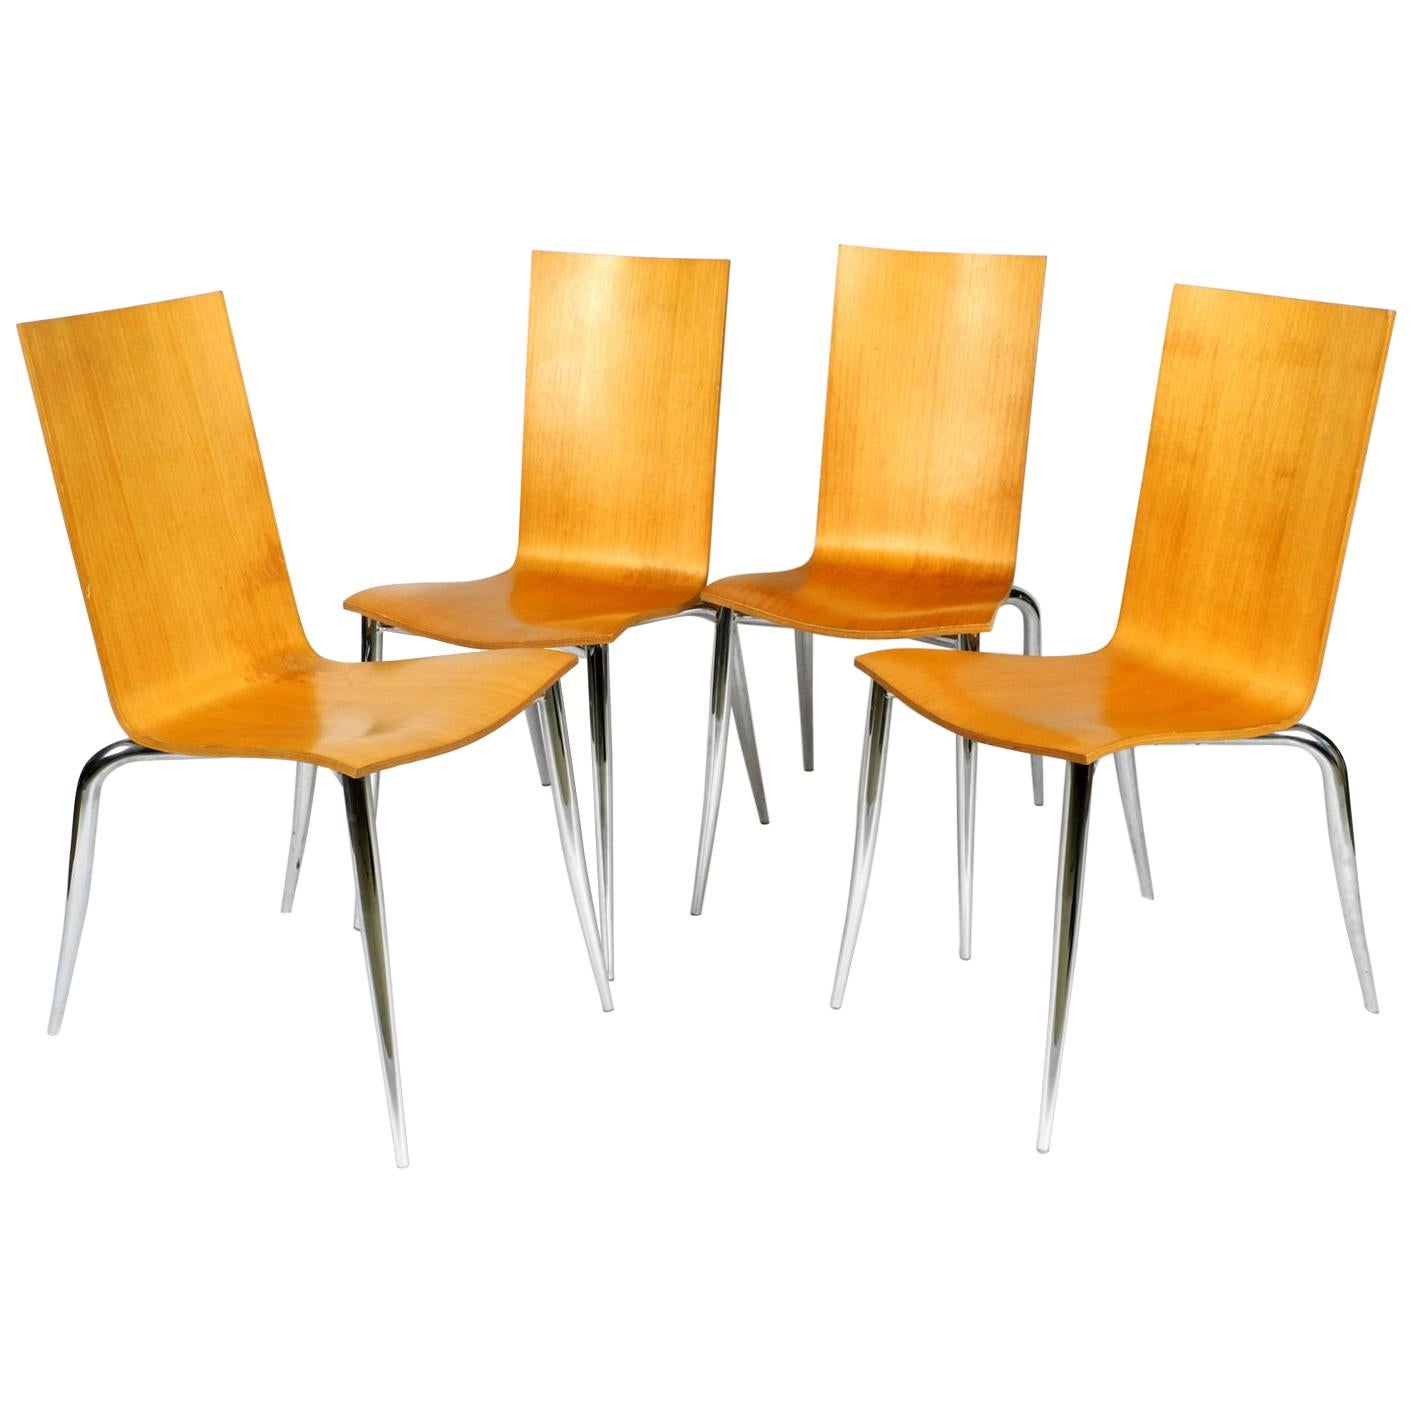 Set of 4 Olly Tango Chairs by Philippe Starck for Driade Aleph 